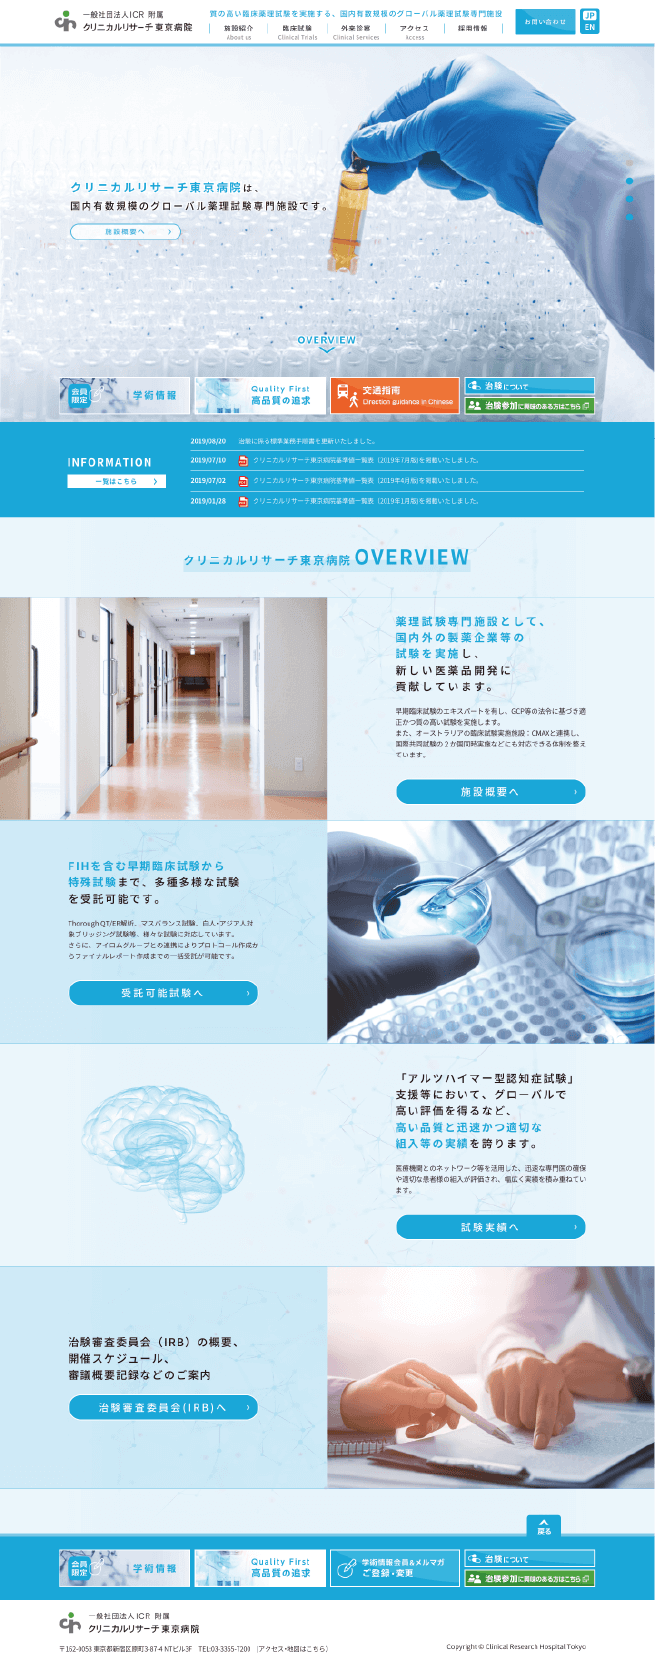 Clinical Research Hospital Tokyo